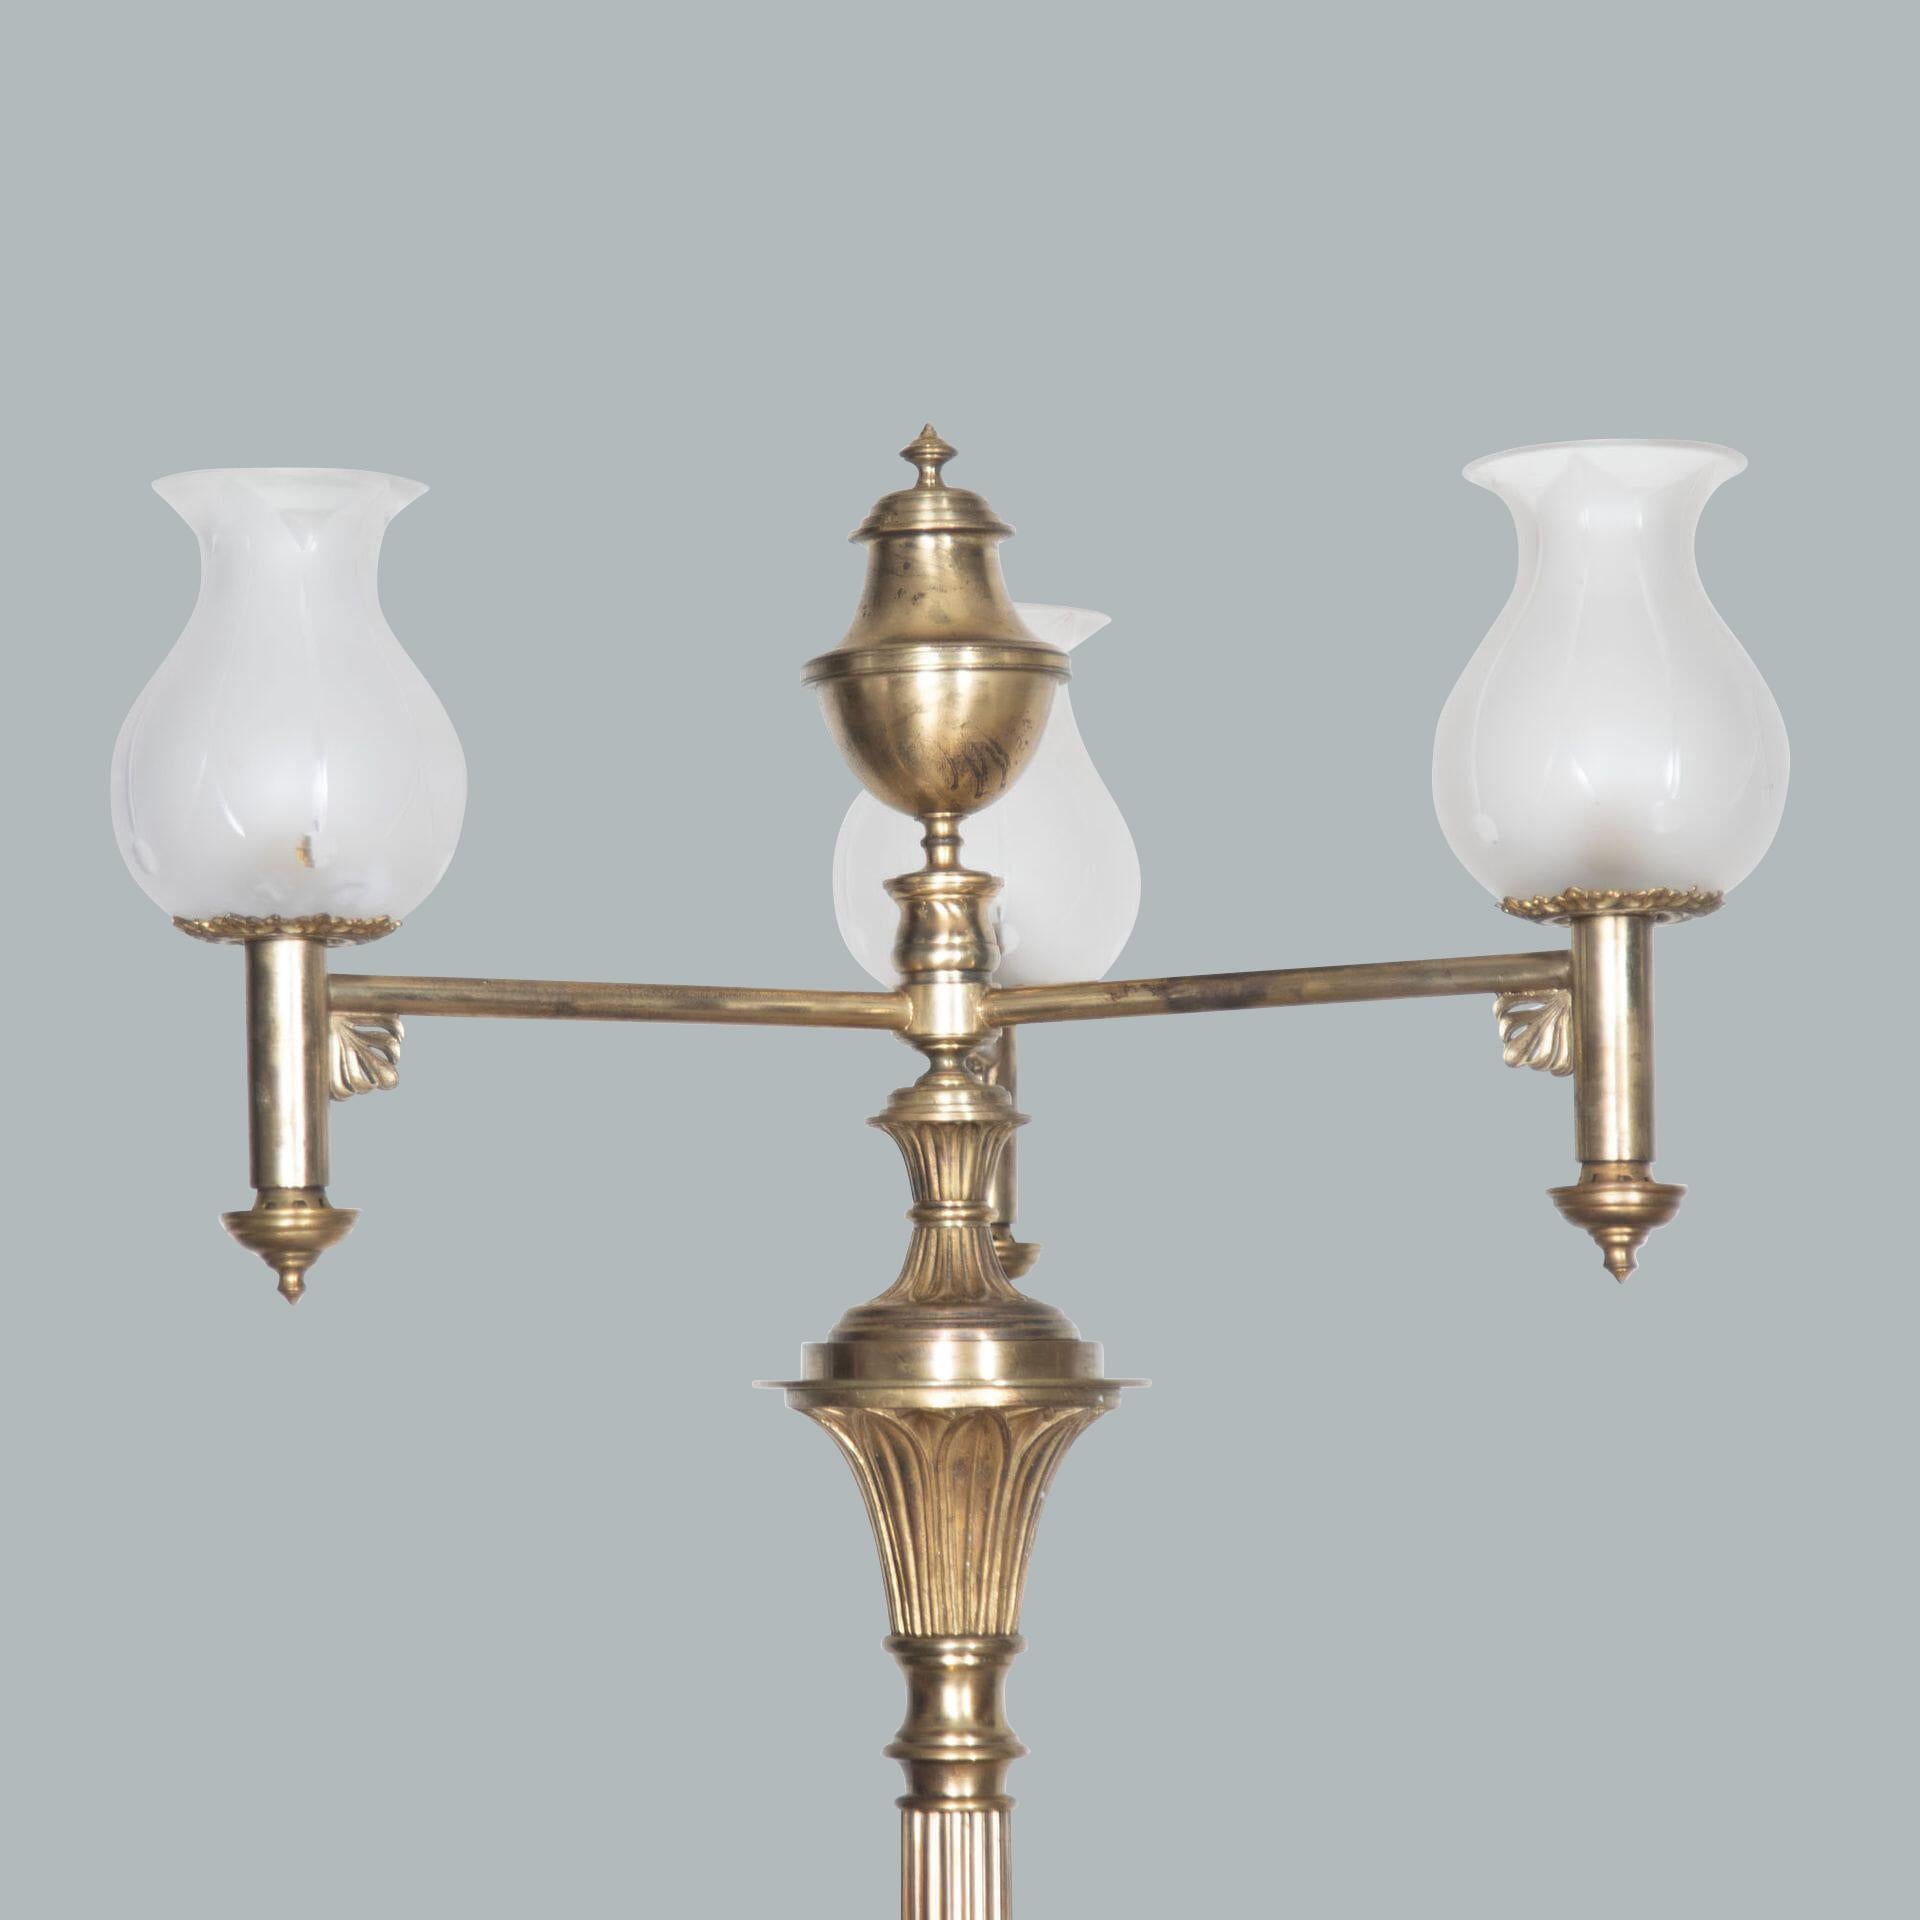 An imposing pair of neo-classical gilt bronze 3 light candelabra/standard lamps, each branch with part frosted tulip shaped glass shades, leading onto fluted columns capped with moulded finials and styff leaves to the base, terminating in powerful